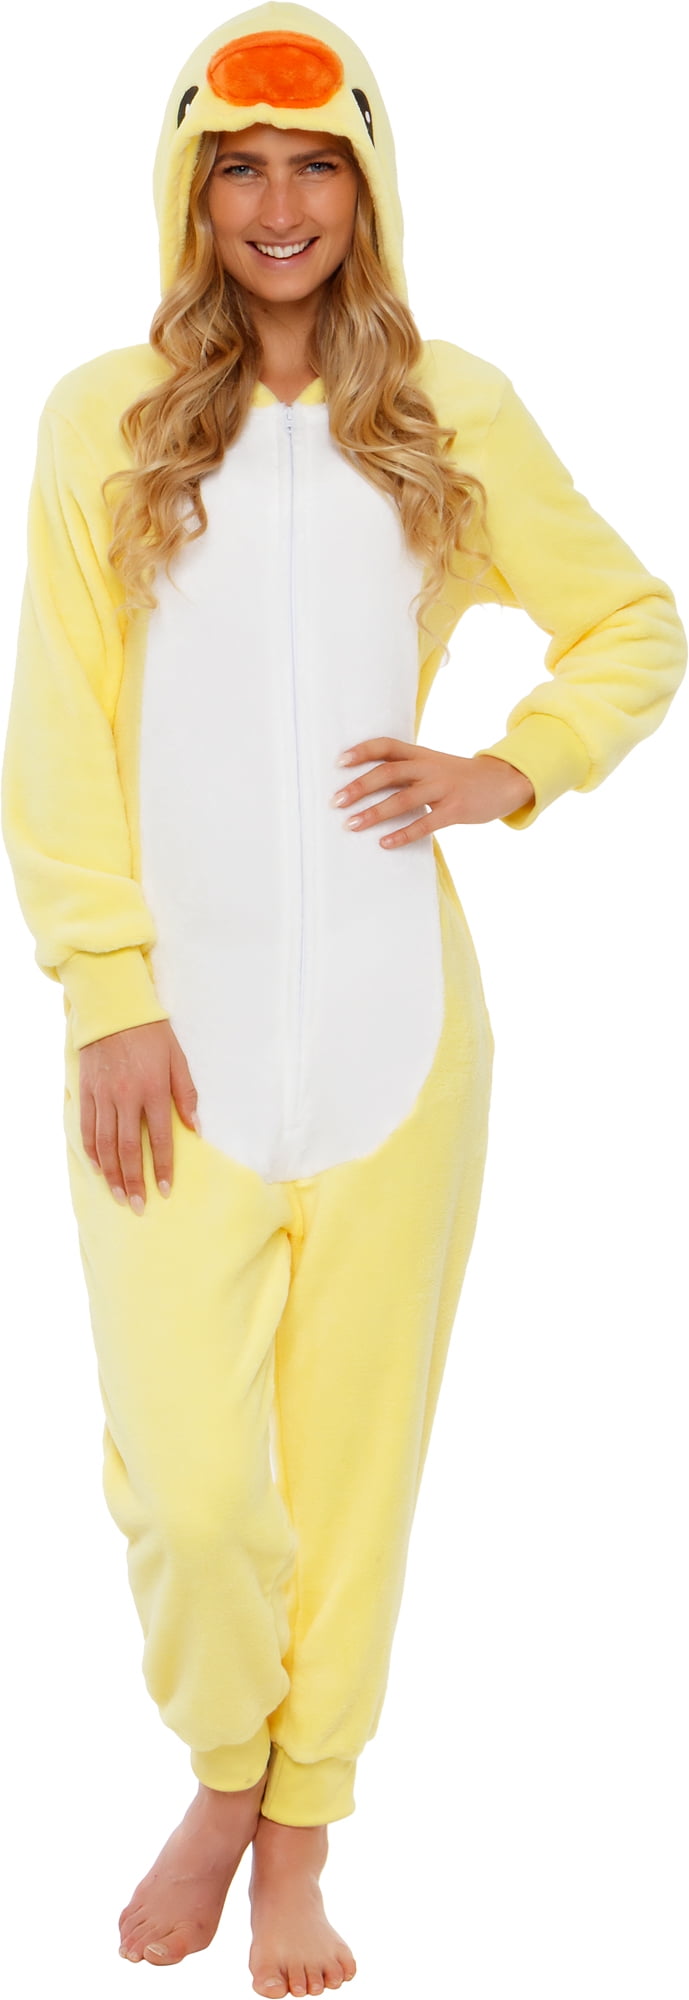 Silver Lilly Slim Fit Duck Animal Adult One Piece Cosplay Costume (Xlarge)  